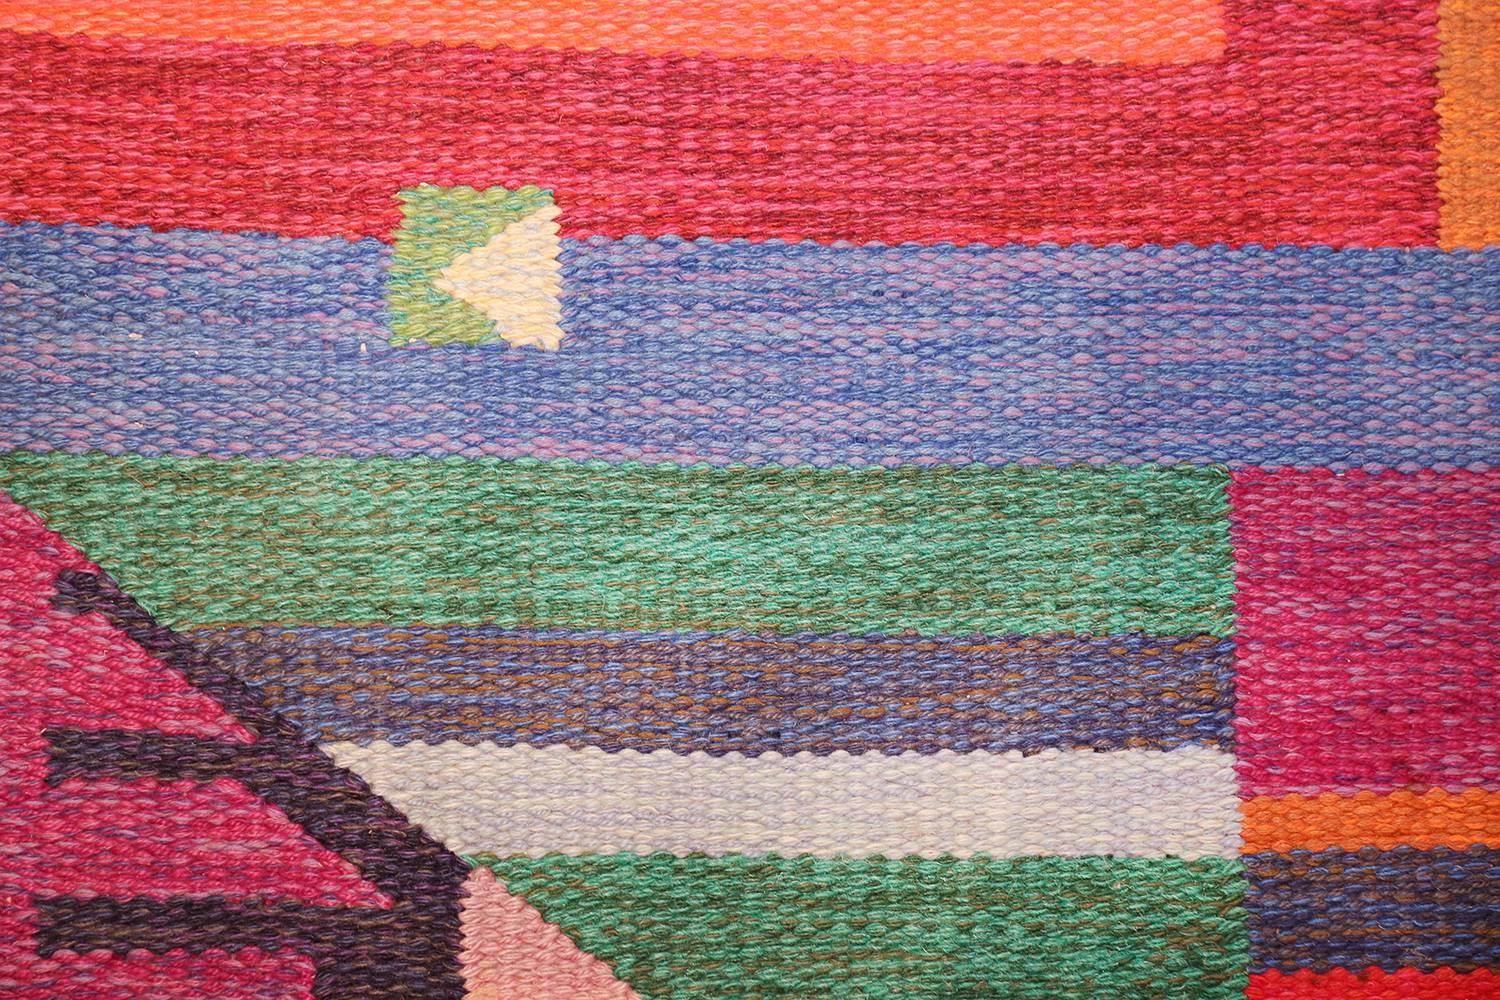 Magnificent and Colorful Vintage Scandinavian Agda Osterberg Kilim Rug, Country of Origin / Rug Type: Scandinavia Rug, Circa Date: Mid 20th Century. Size: 5 ft 5 in x 8 ft 5 in (1.65 m x 2.57 m).